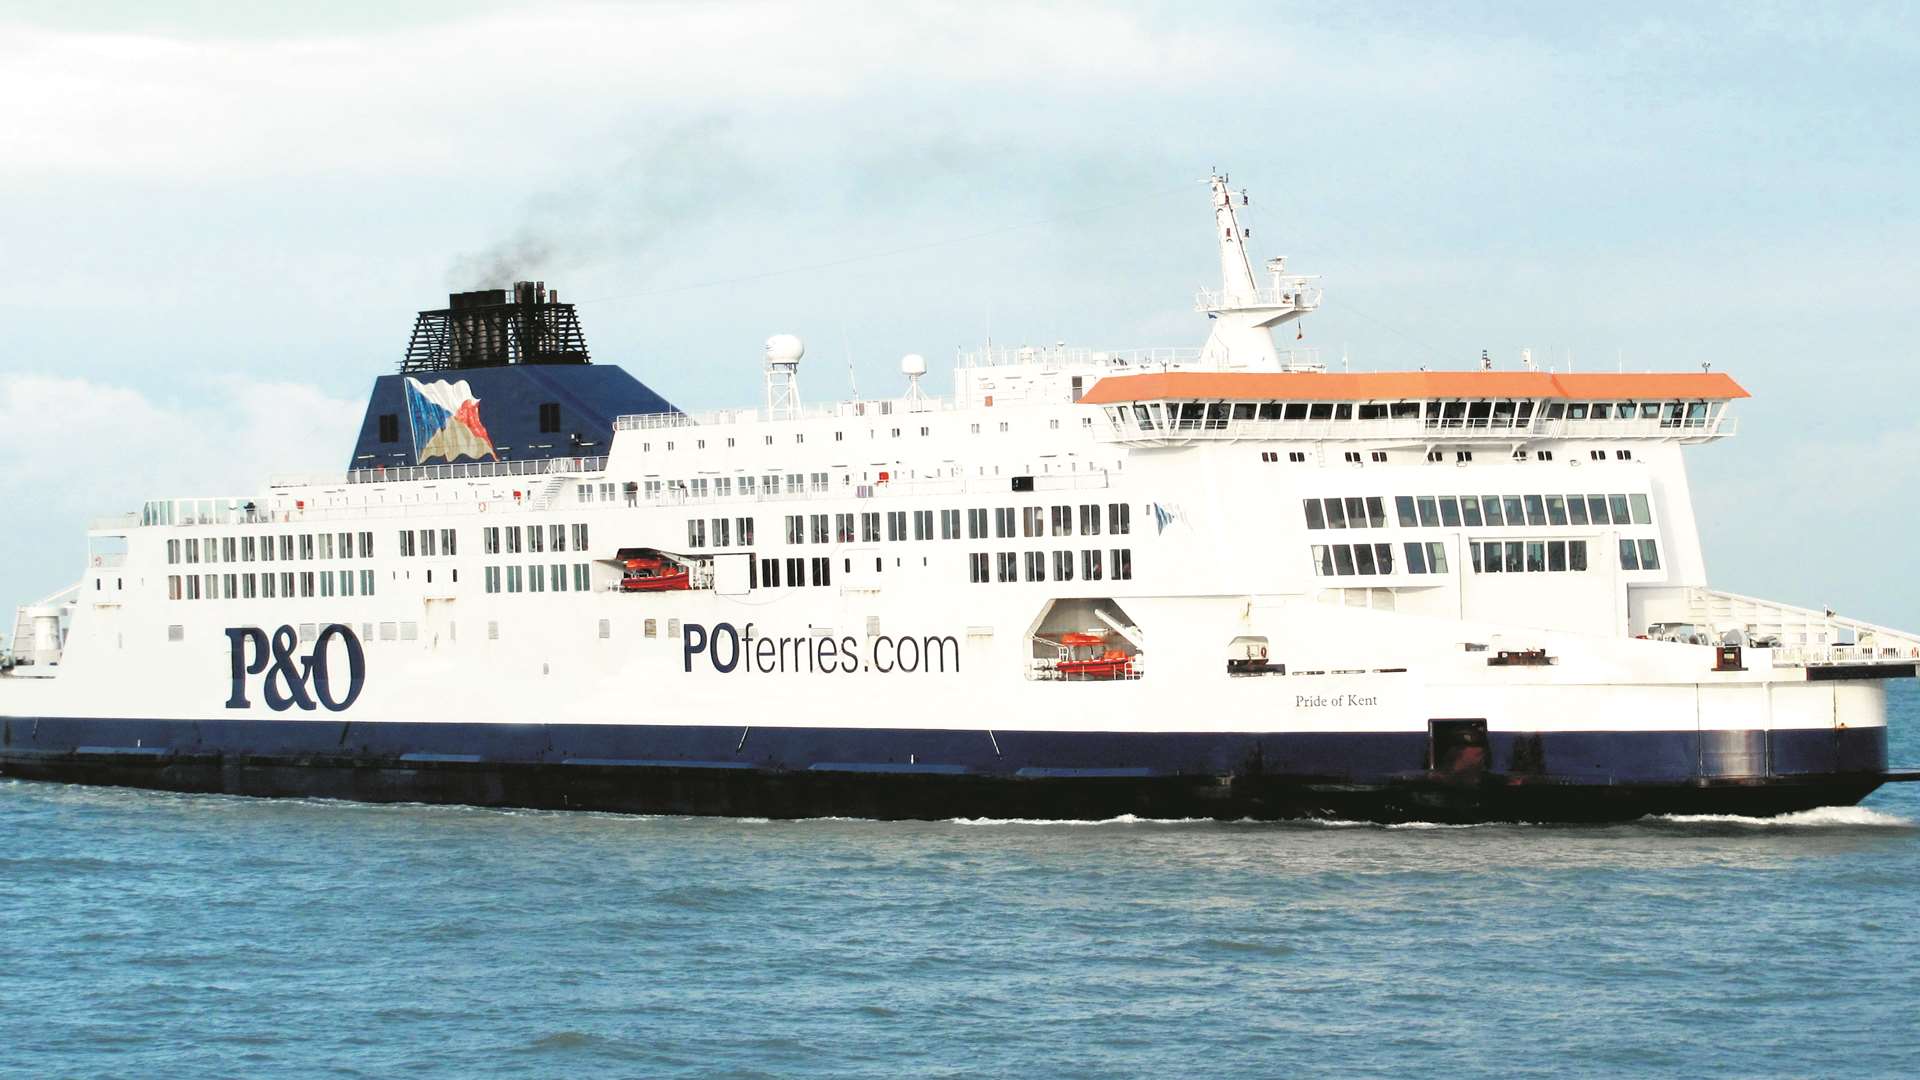 The Pride of Kent ferry